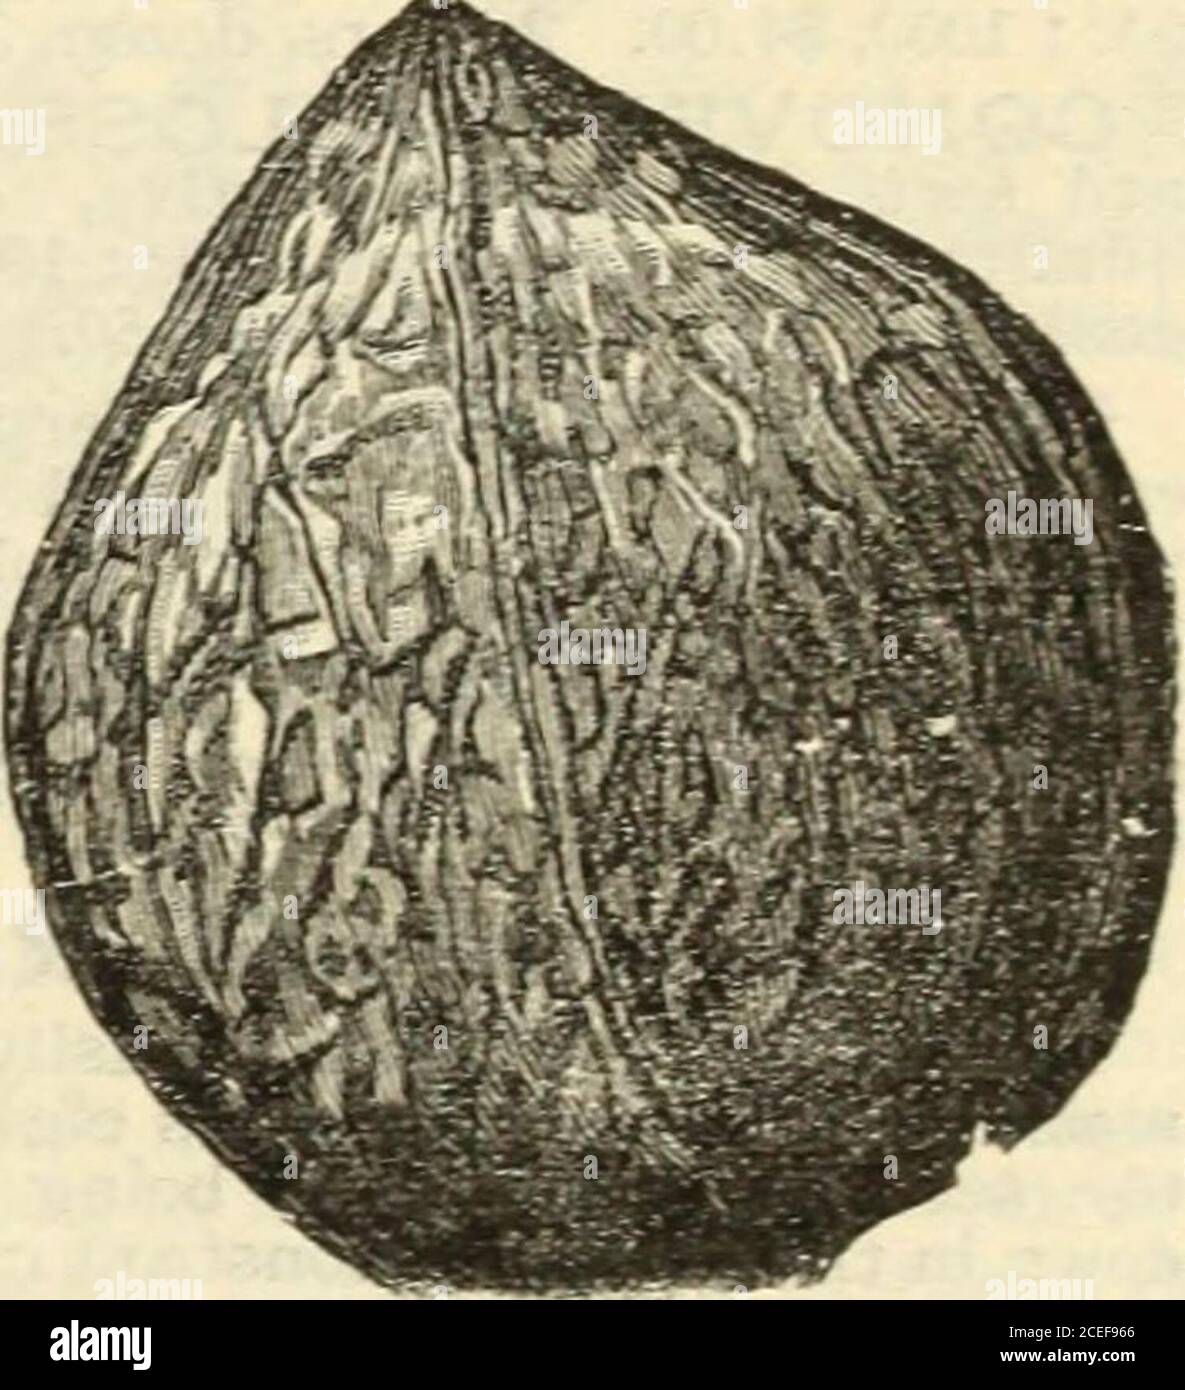 . Lovett's guide to fruit culture : spring, 1901. -, bear3-cung, and are more regu-lar and productive thanthe English walnut; hav-ing an abundance of fibrousroots it transplants as safely as an apple tree. 4 to 5 ft., ea.,25c.; doz., $2.50. 5 to 6 ft., ea., 35c.; doz., $3.50. 6 to 8 ft., ea.,50c.; doz.,$5.00; 100, $30.00. 8 to 10ft., ea., 75c.; doz.,$7.50;100, $50.00. 10 to 12 ft., ea., $1.00; doz., $10.00. JAPANESE. Juglans Max Cordiformis. Also a Jap-anese species, resemblingin some respects j. Sieboldibut differing concidcrablyin form of nuts, which arebroad, slightly flattened,with acute p Stock Photo